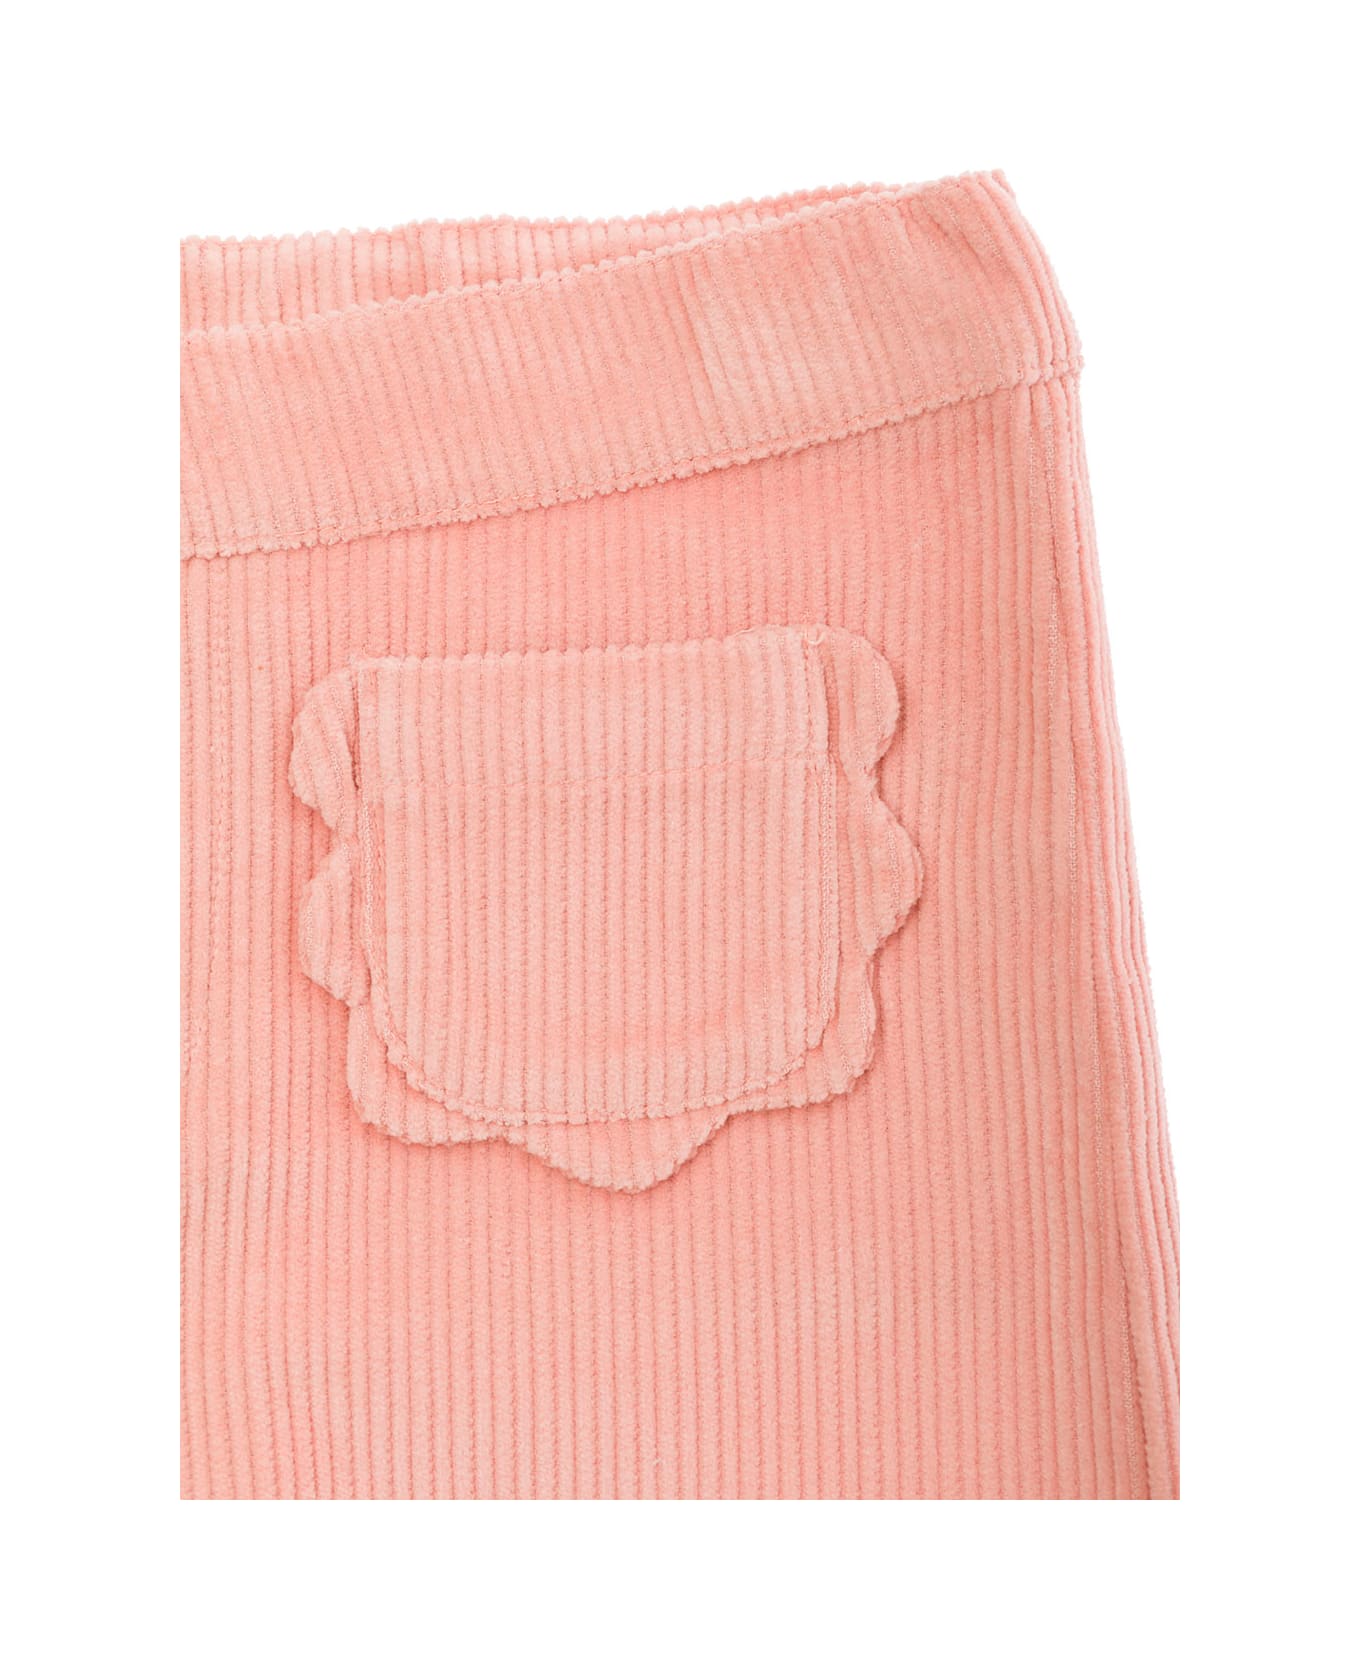 Emile Et Ida Pink Pants With Concealed Closure And Patch Pockets In Corduroy Girl - Pink ボトムス